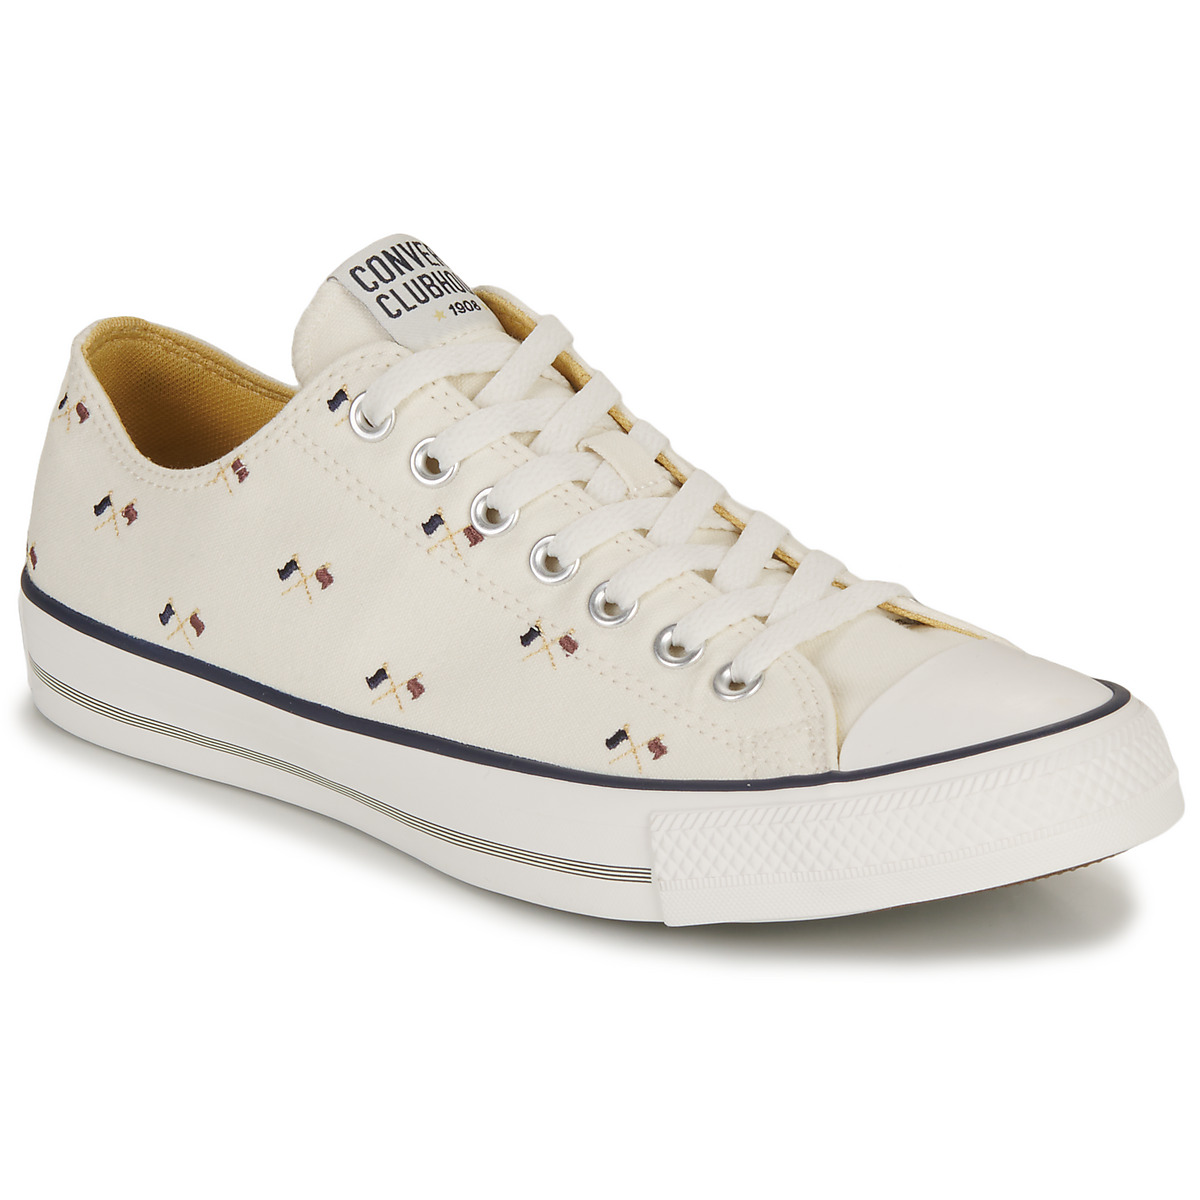 Converse Chuck Taylor All Star-converse Clubhouse White